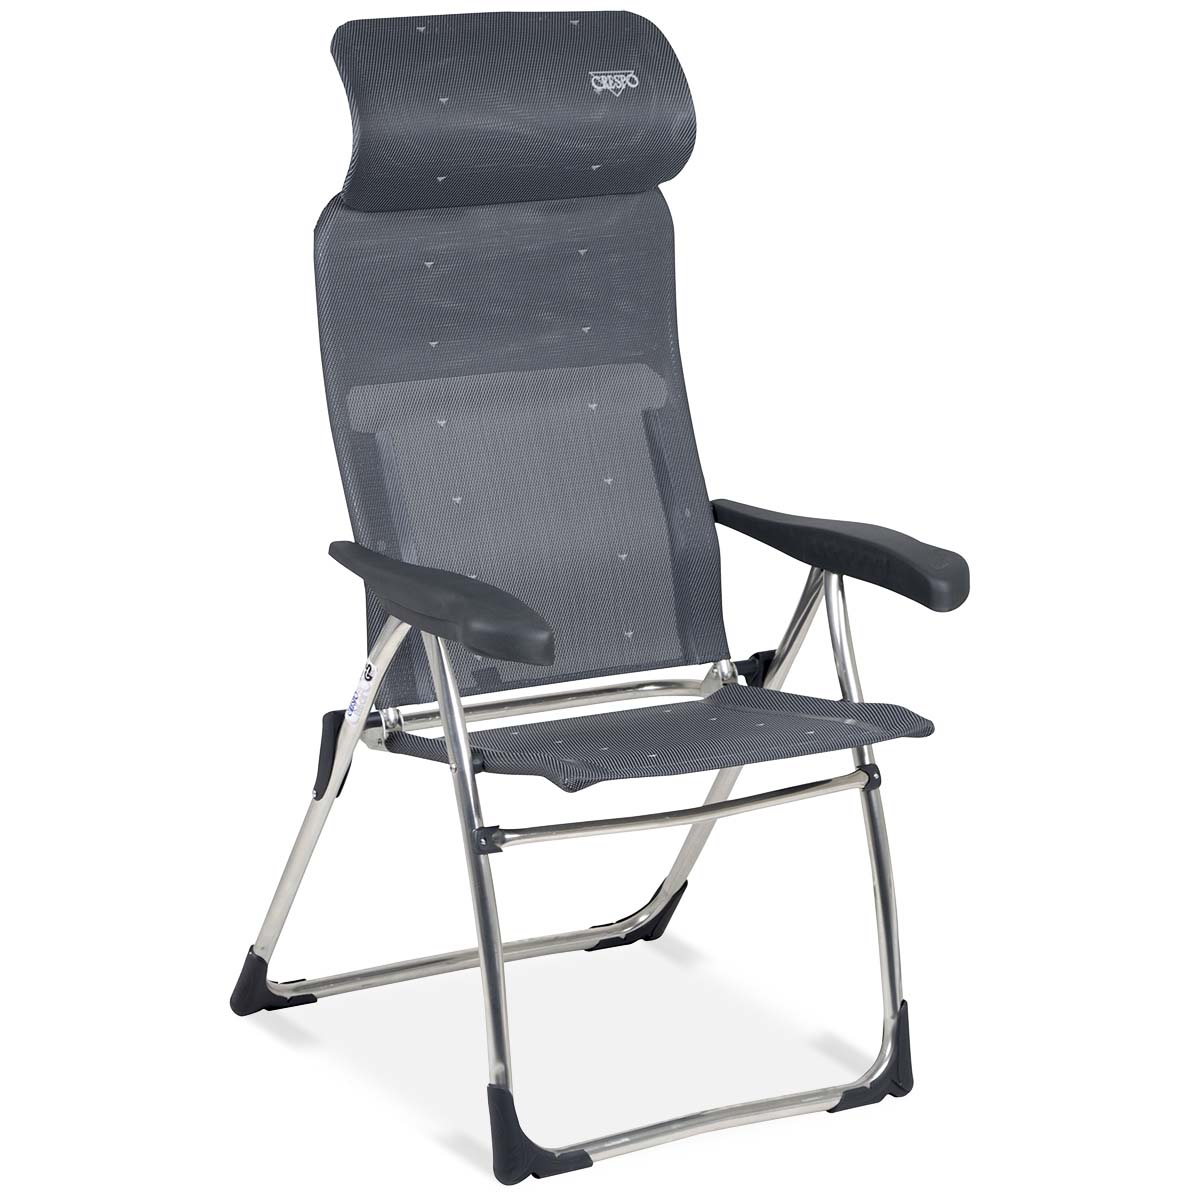 1104963 A lightweight and extra compact positionable seat. This chair offers maximum comfort through the 7 position adjustable backrest and a continuously adjustable headrest (back length: 65-83 cm). The backrest, the seat and the armrests are ergonomically shaped. The chair has a U-frame with stabilizers and extra thick tubes for additional sturdiness and stability. Due to the retractable headrest the chair can be stored extra compact. Seat height: 45 centimetres. Seat depth: 38 centimetres. Seat width: 48 centimetres. Maximum load bearing capacity: 110 kilogram. Up to 50% less storage volume compared to other camping chairs!